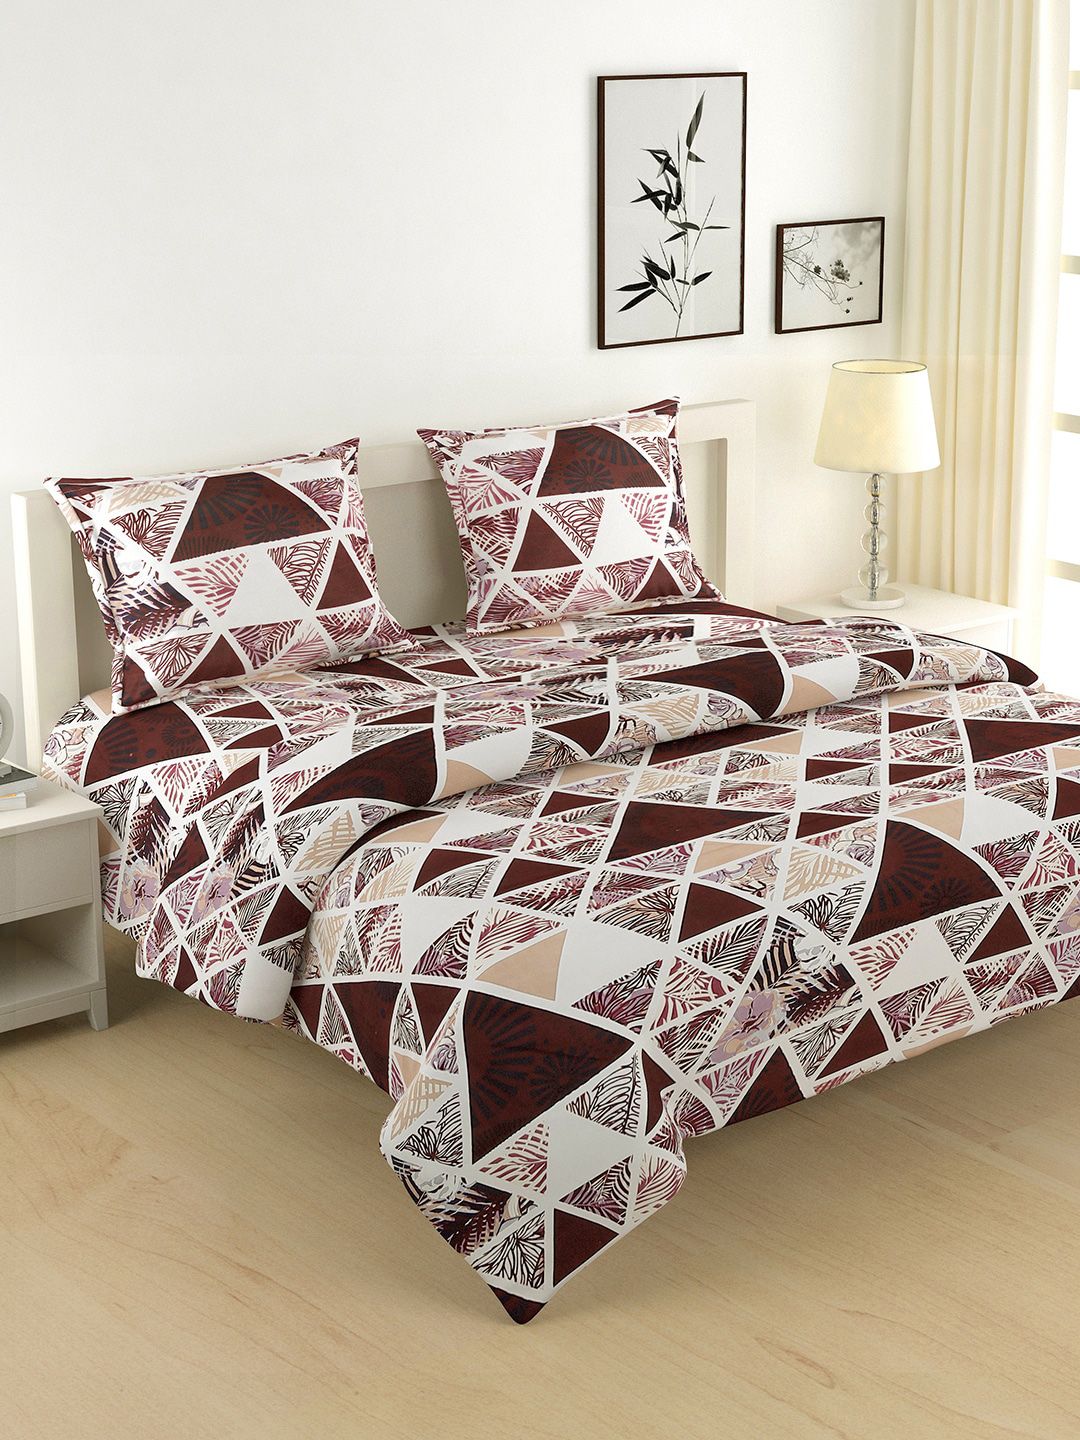 SWAYAM Brown & White Geometric Printed Bedding Set With Comforter Price in India